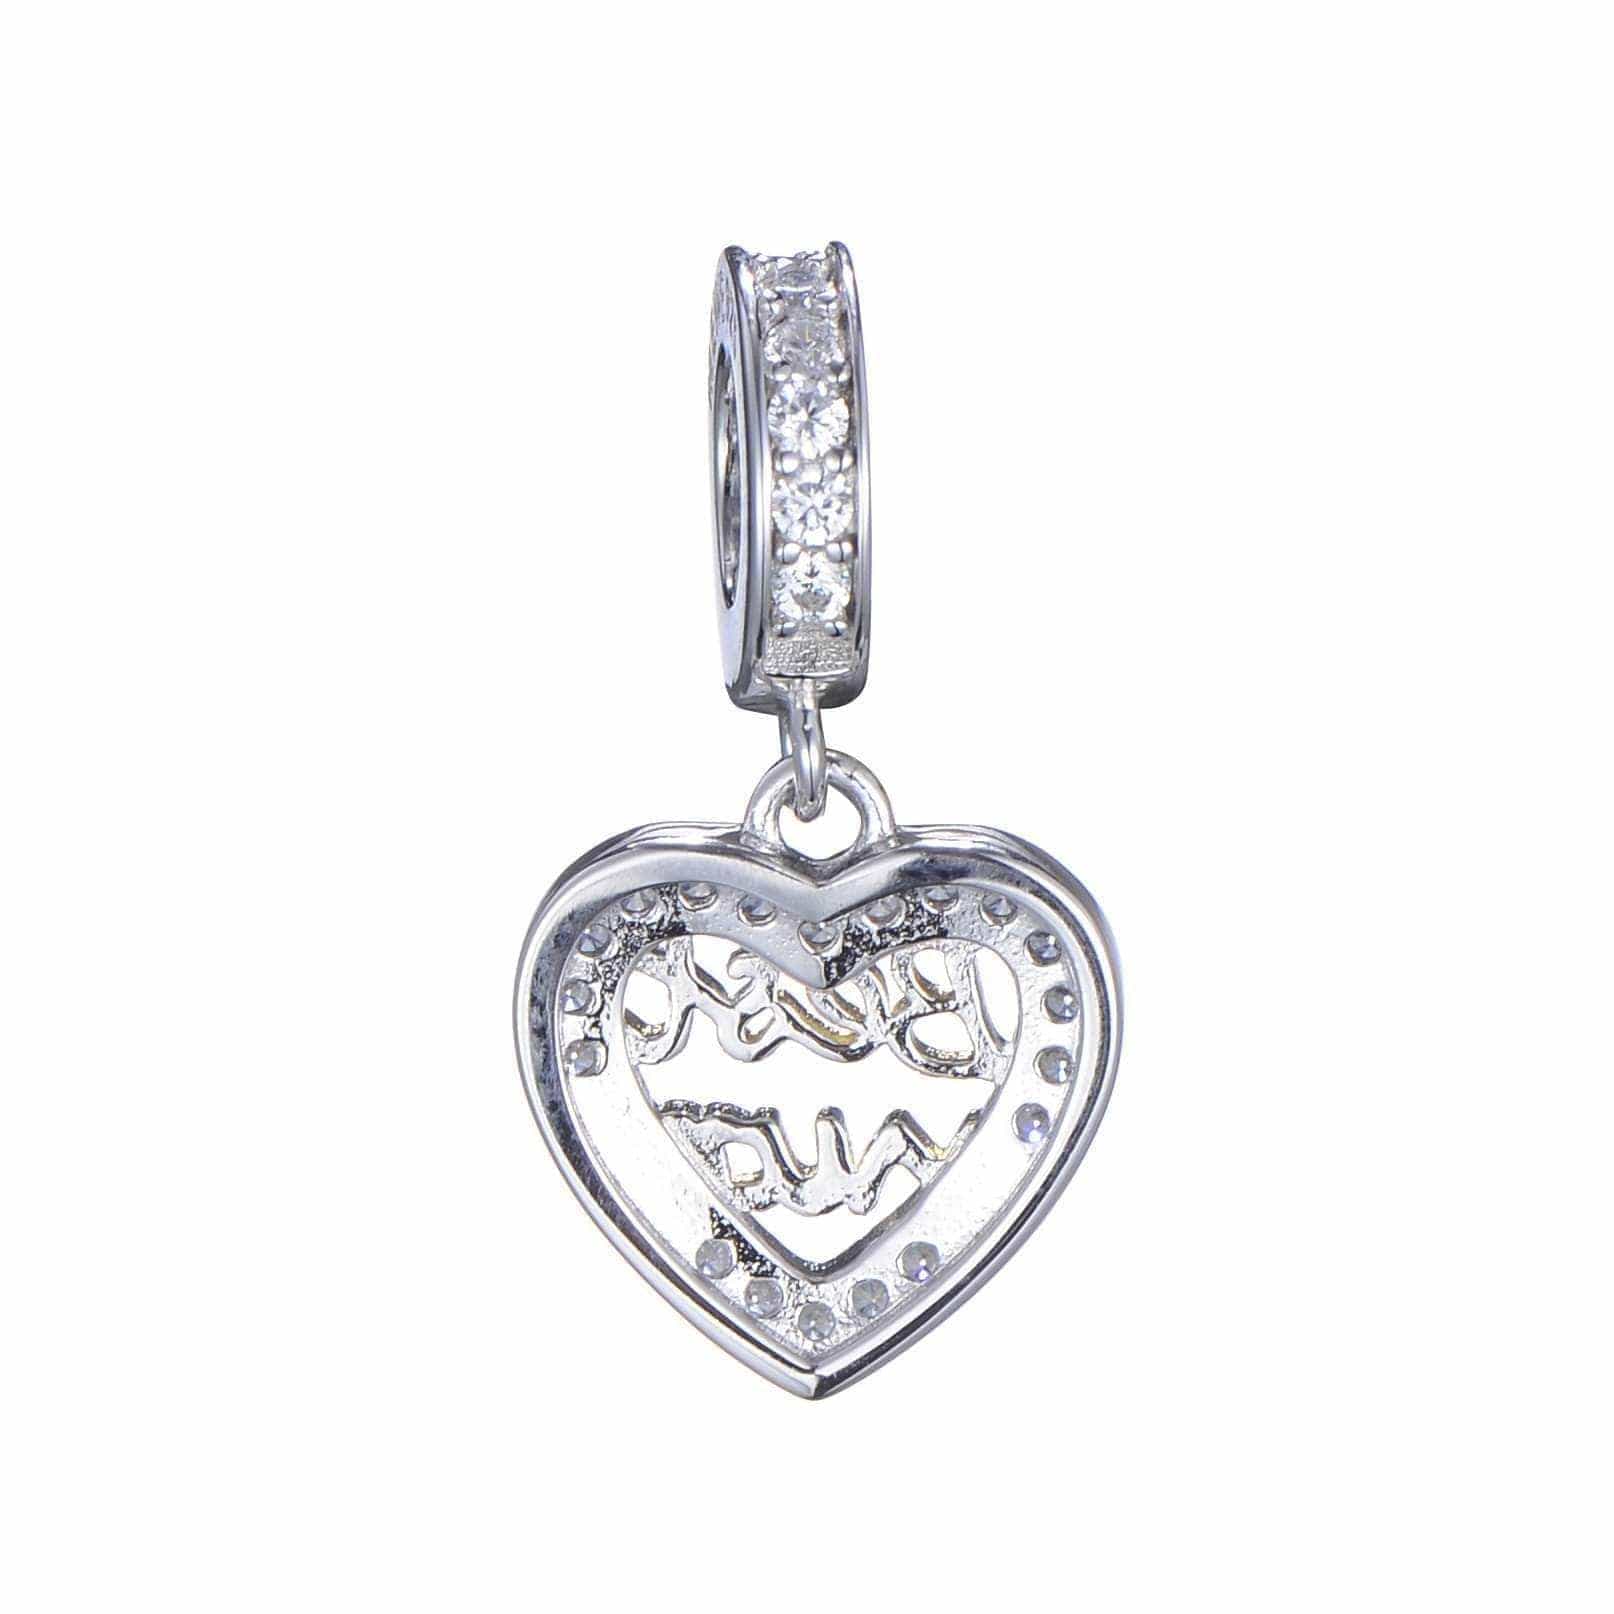 shipped in AUS CHARMS Love Best MUM Charm